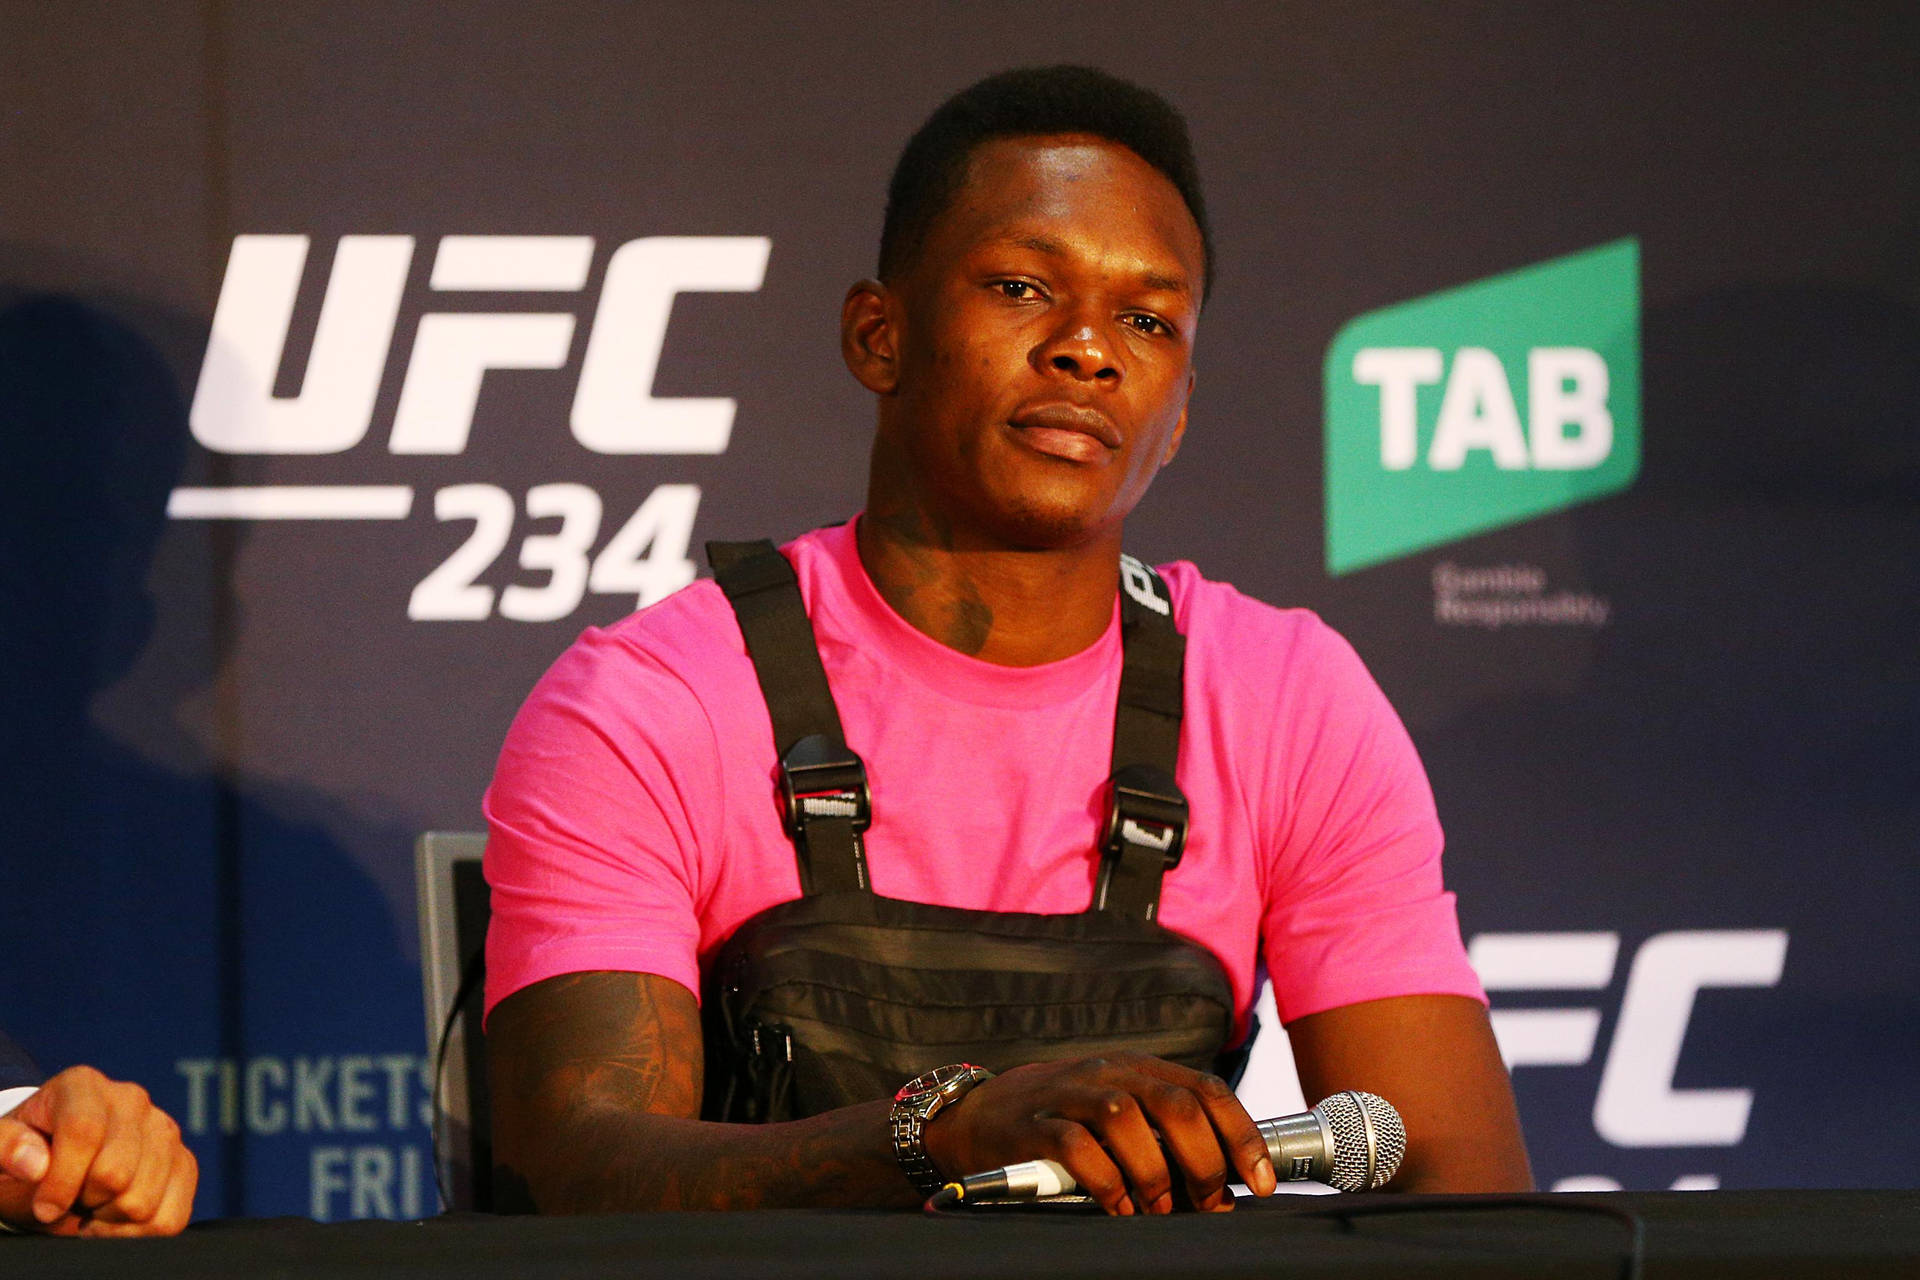 Israel Adesanya In Press Conference Background